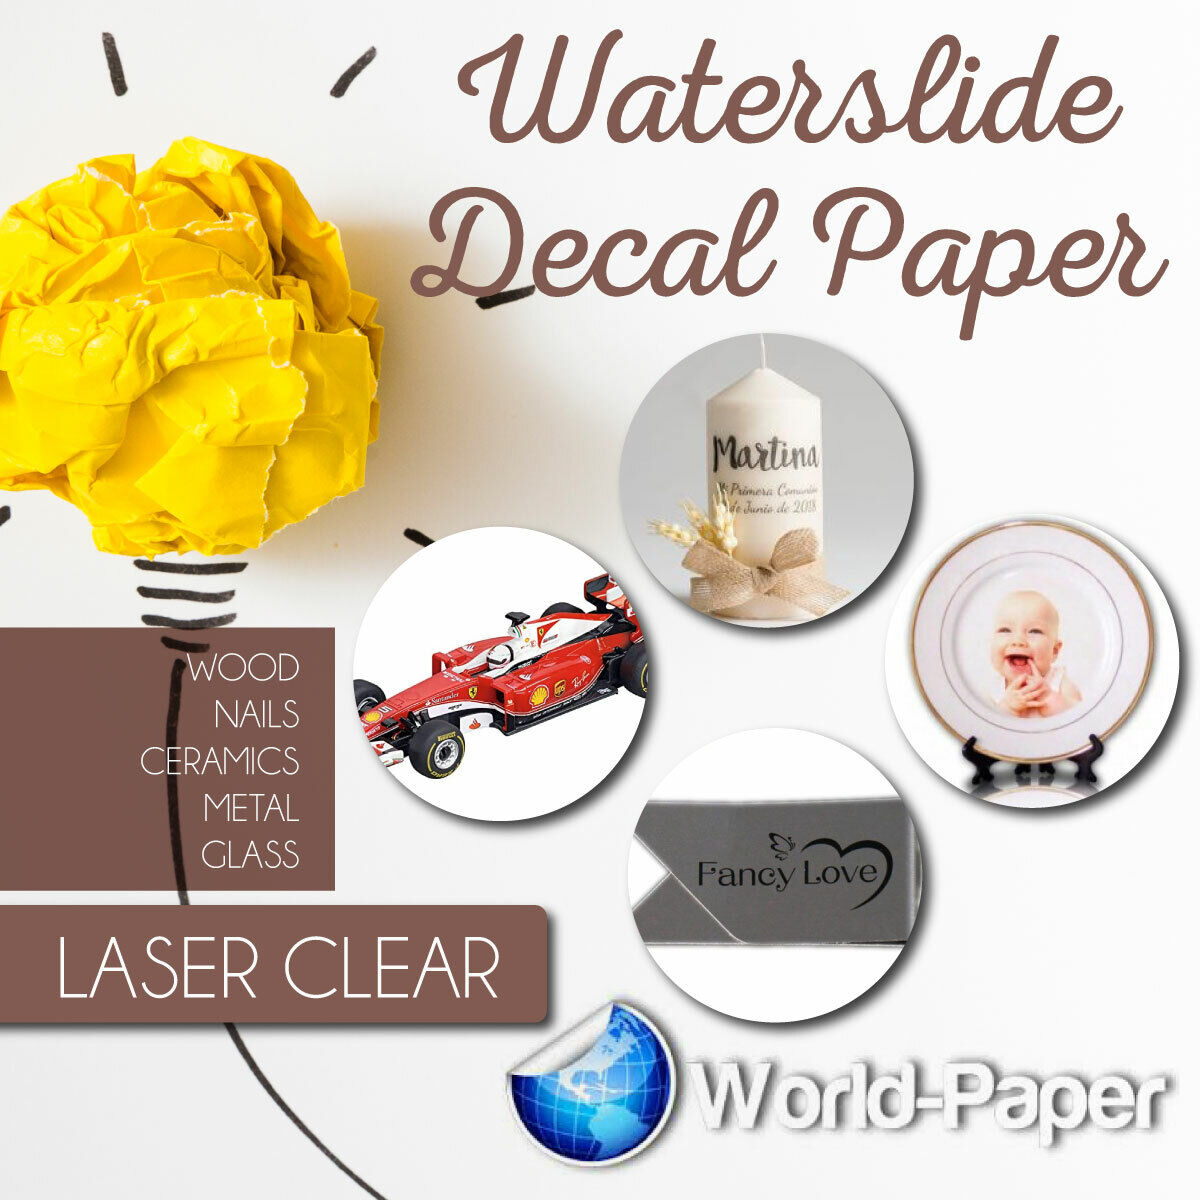 10 sheets Premium CLEAR LASER waterslide decal transfer paper 8.5x11 USA#1